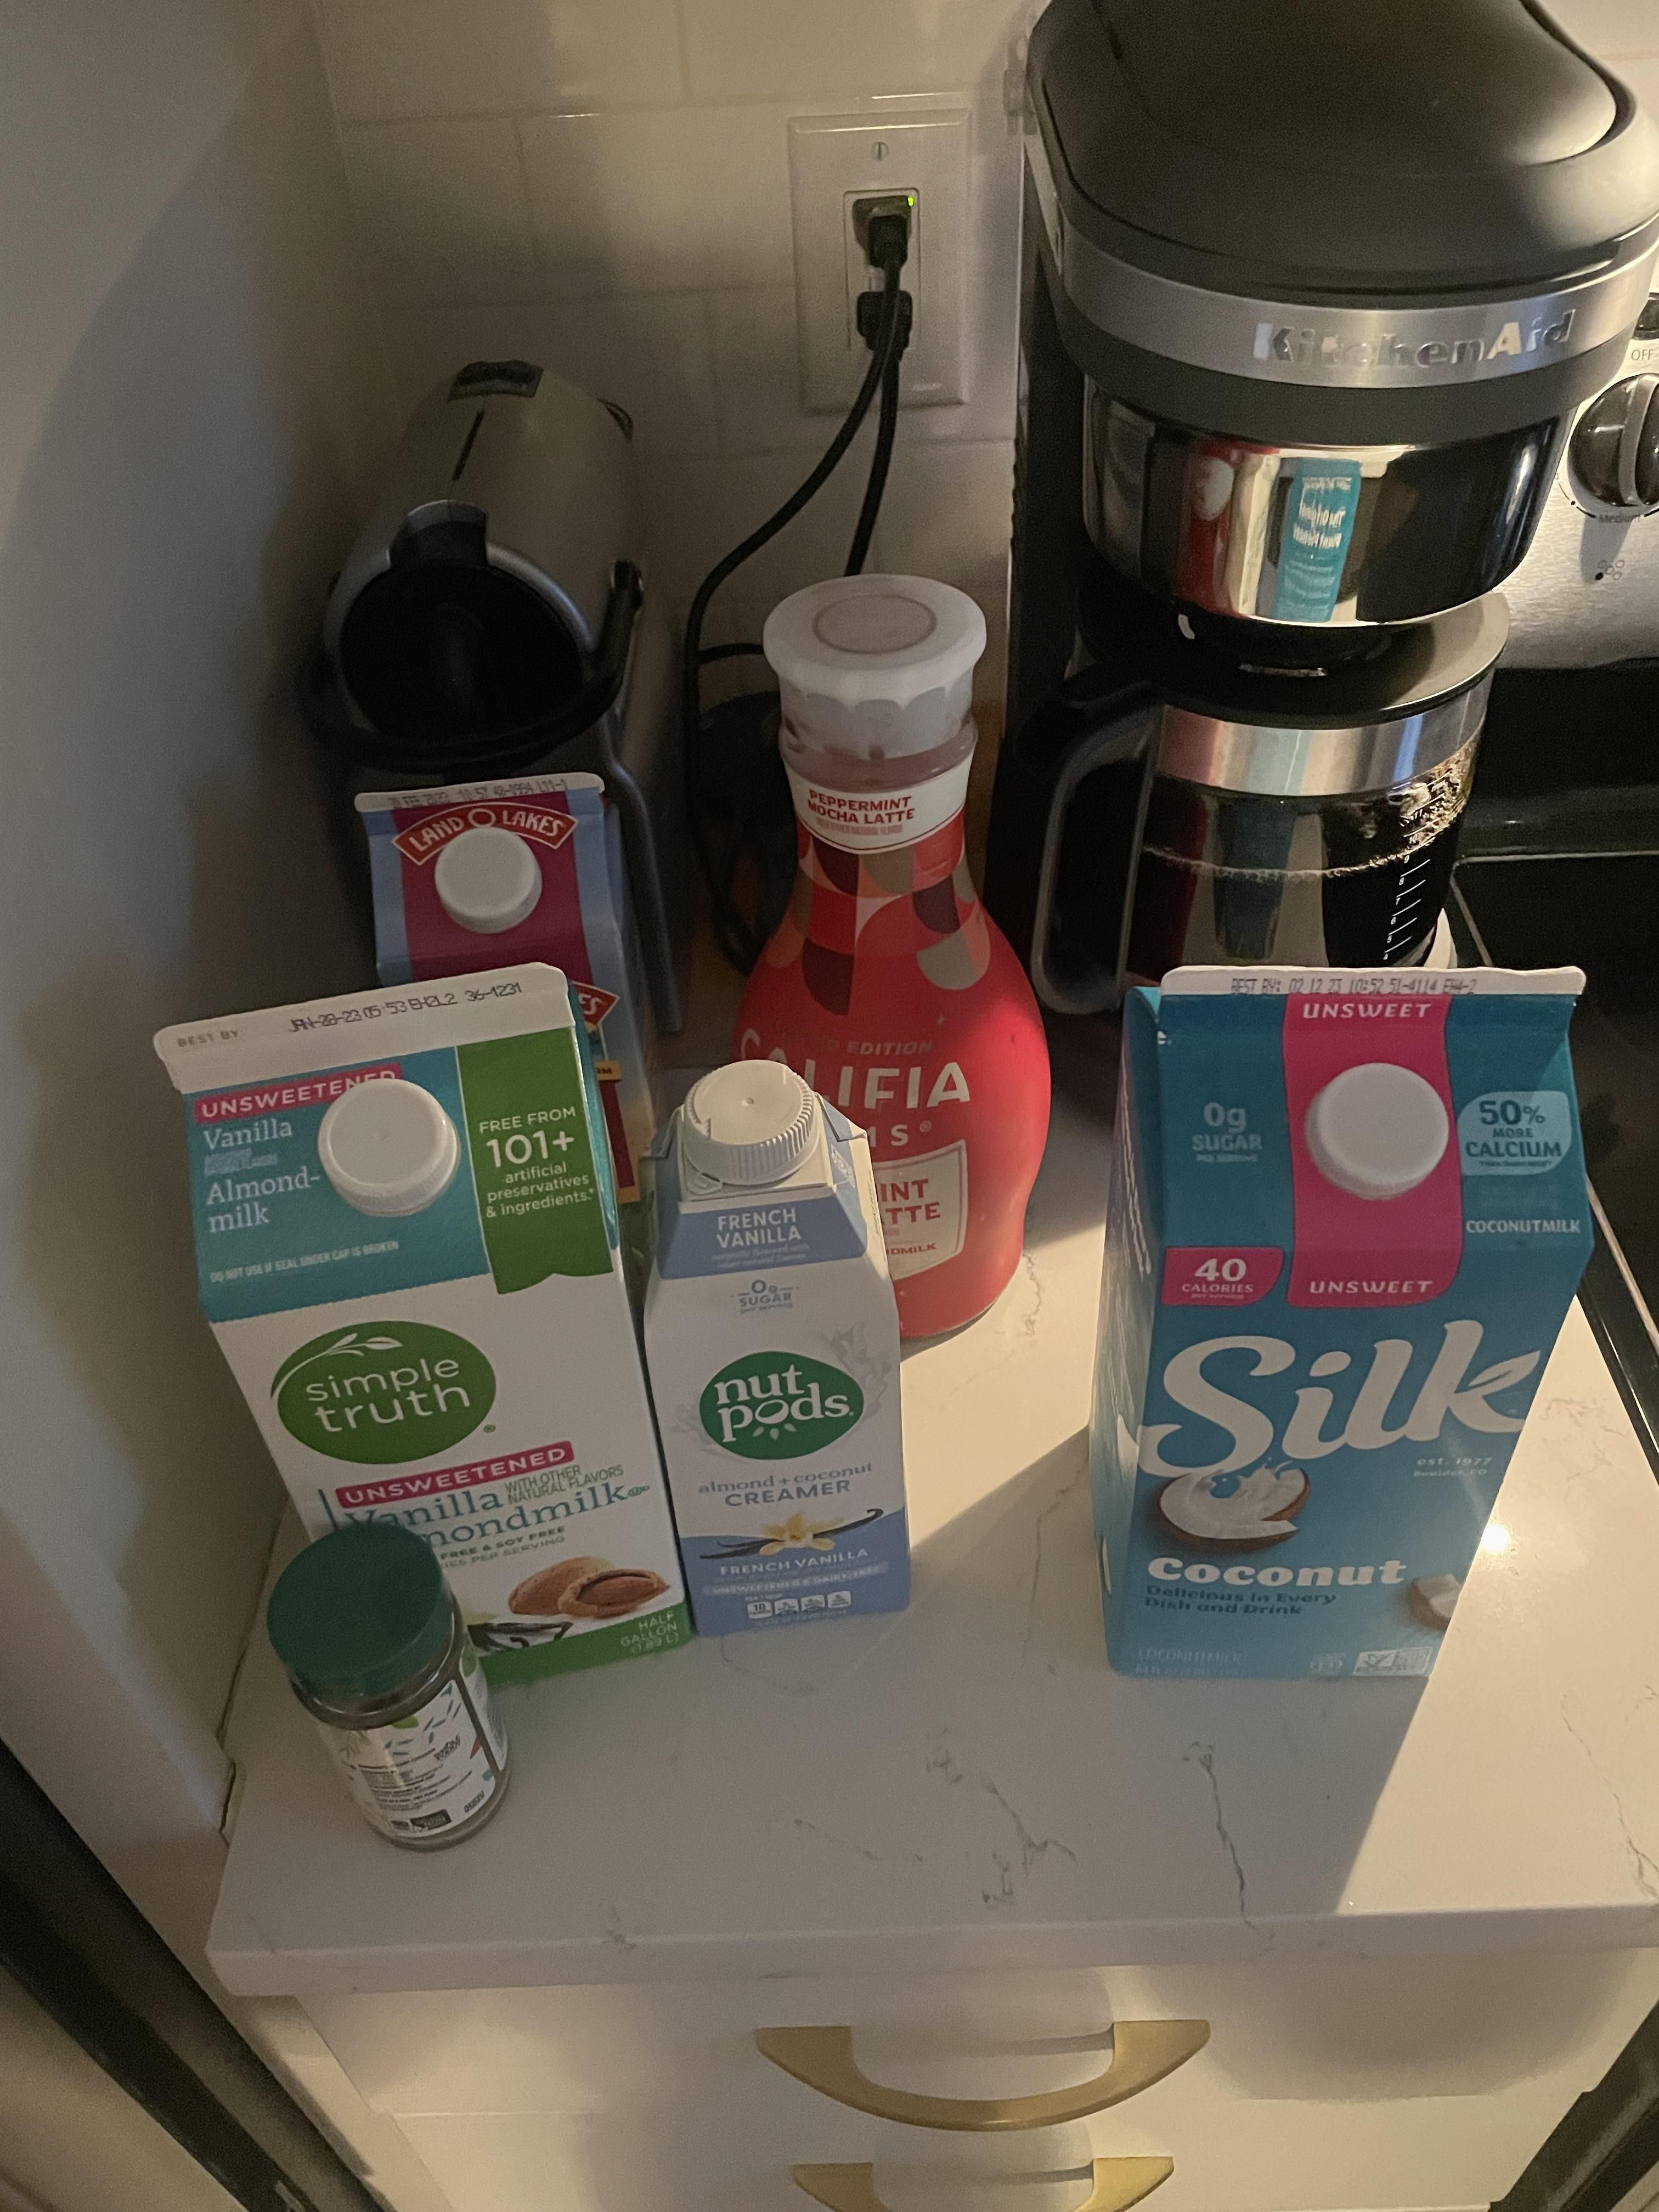 My wife claims to love coffee but she mixes it with all of this each morning. I believe she is more into dairy alternatives.